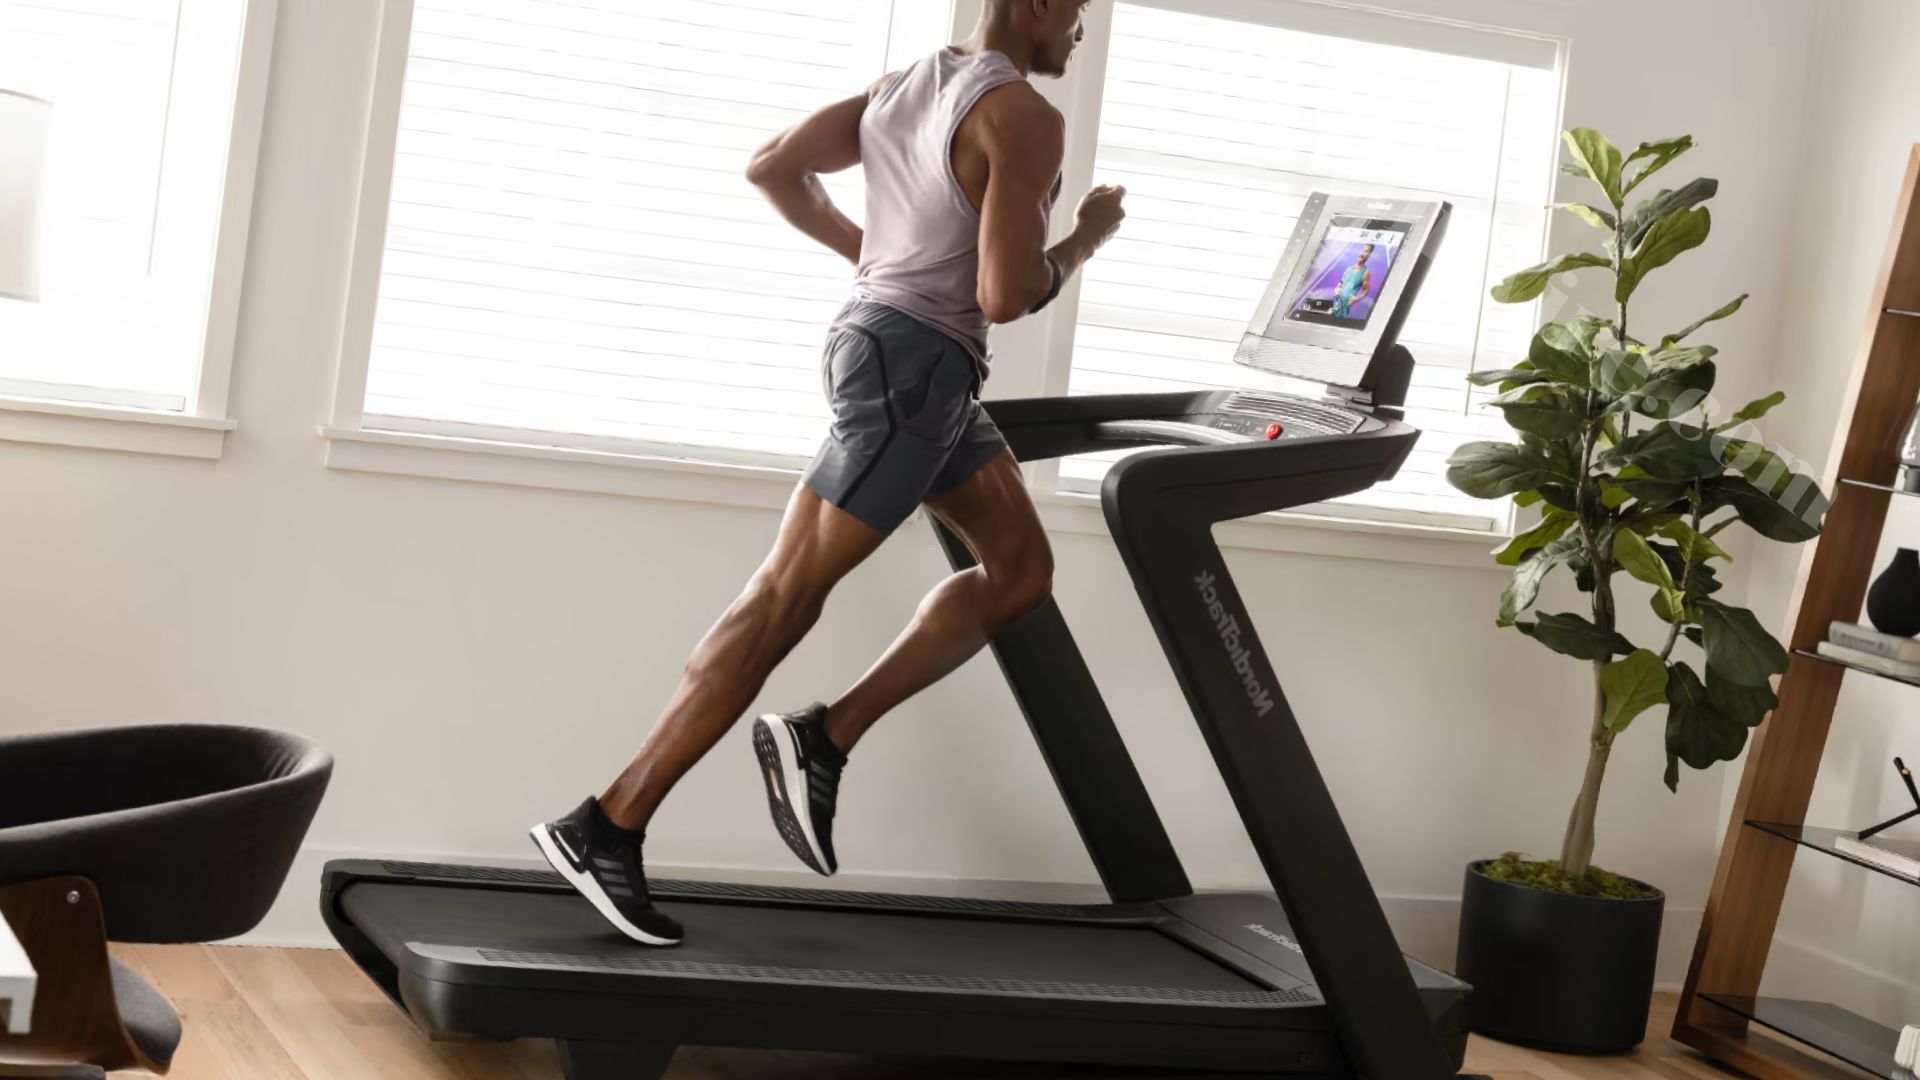 What Parts of Your Body Does a Treadmill Tone?